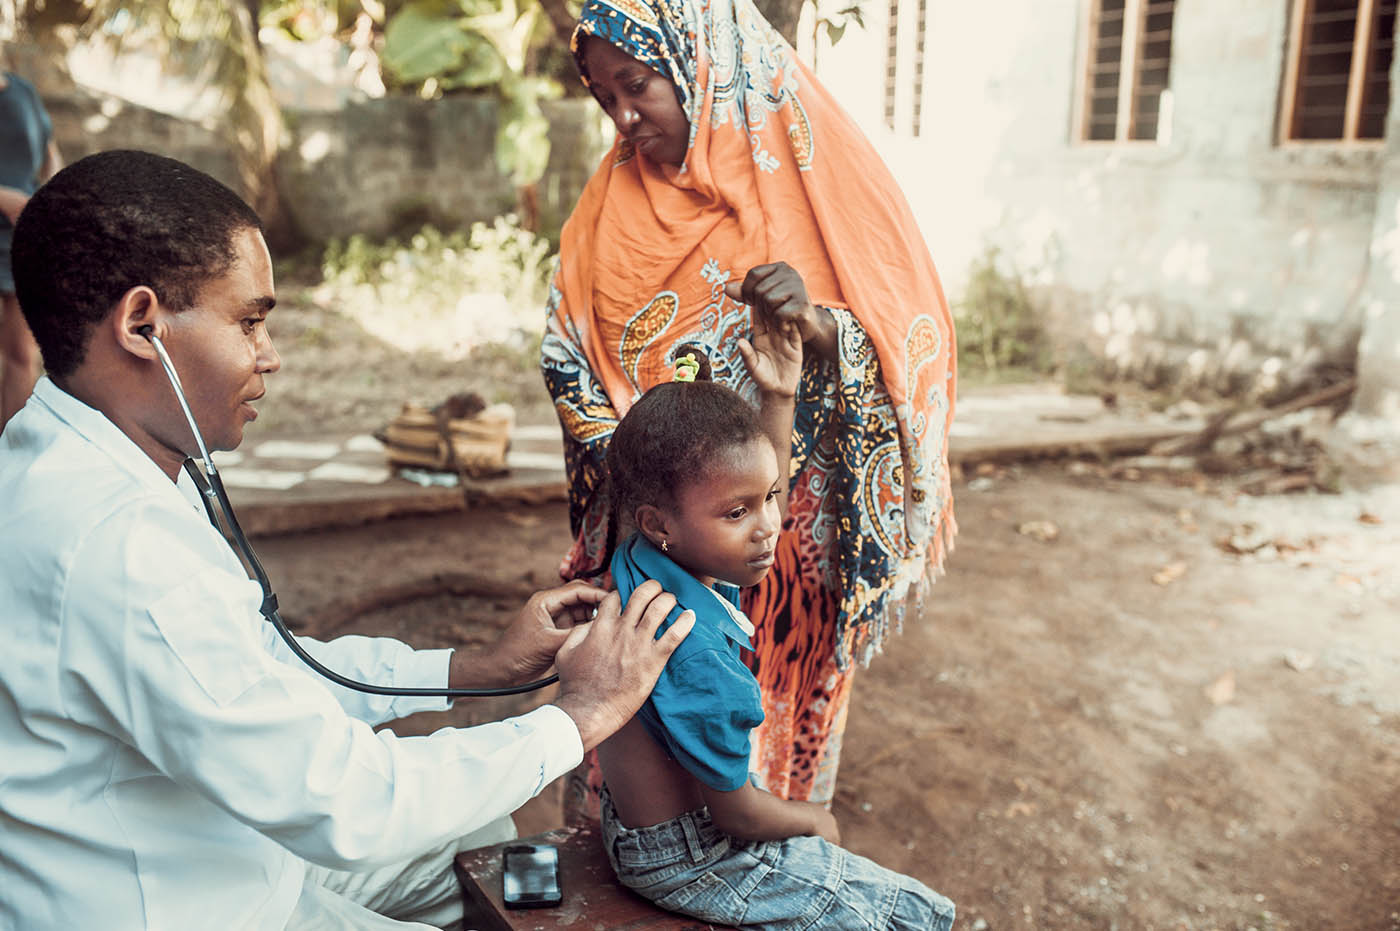 A doctor using a stethoscope to listen to a child's heartbeat.